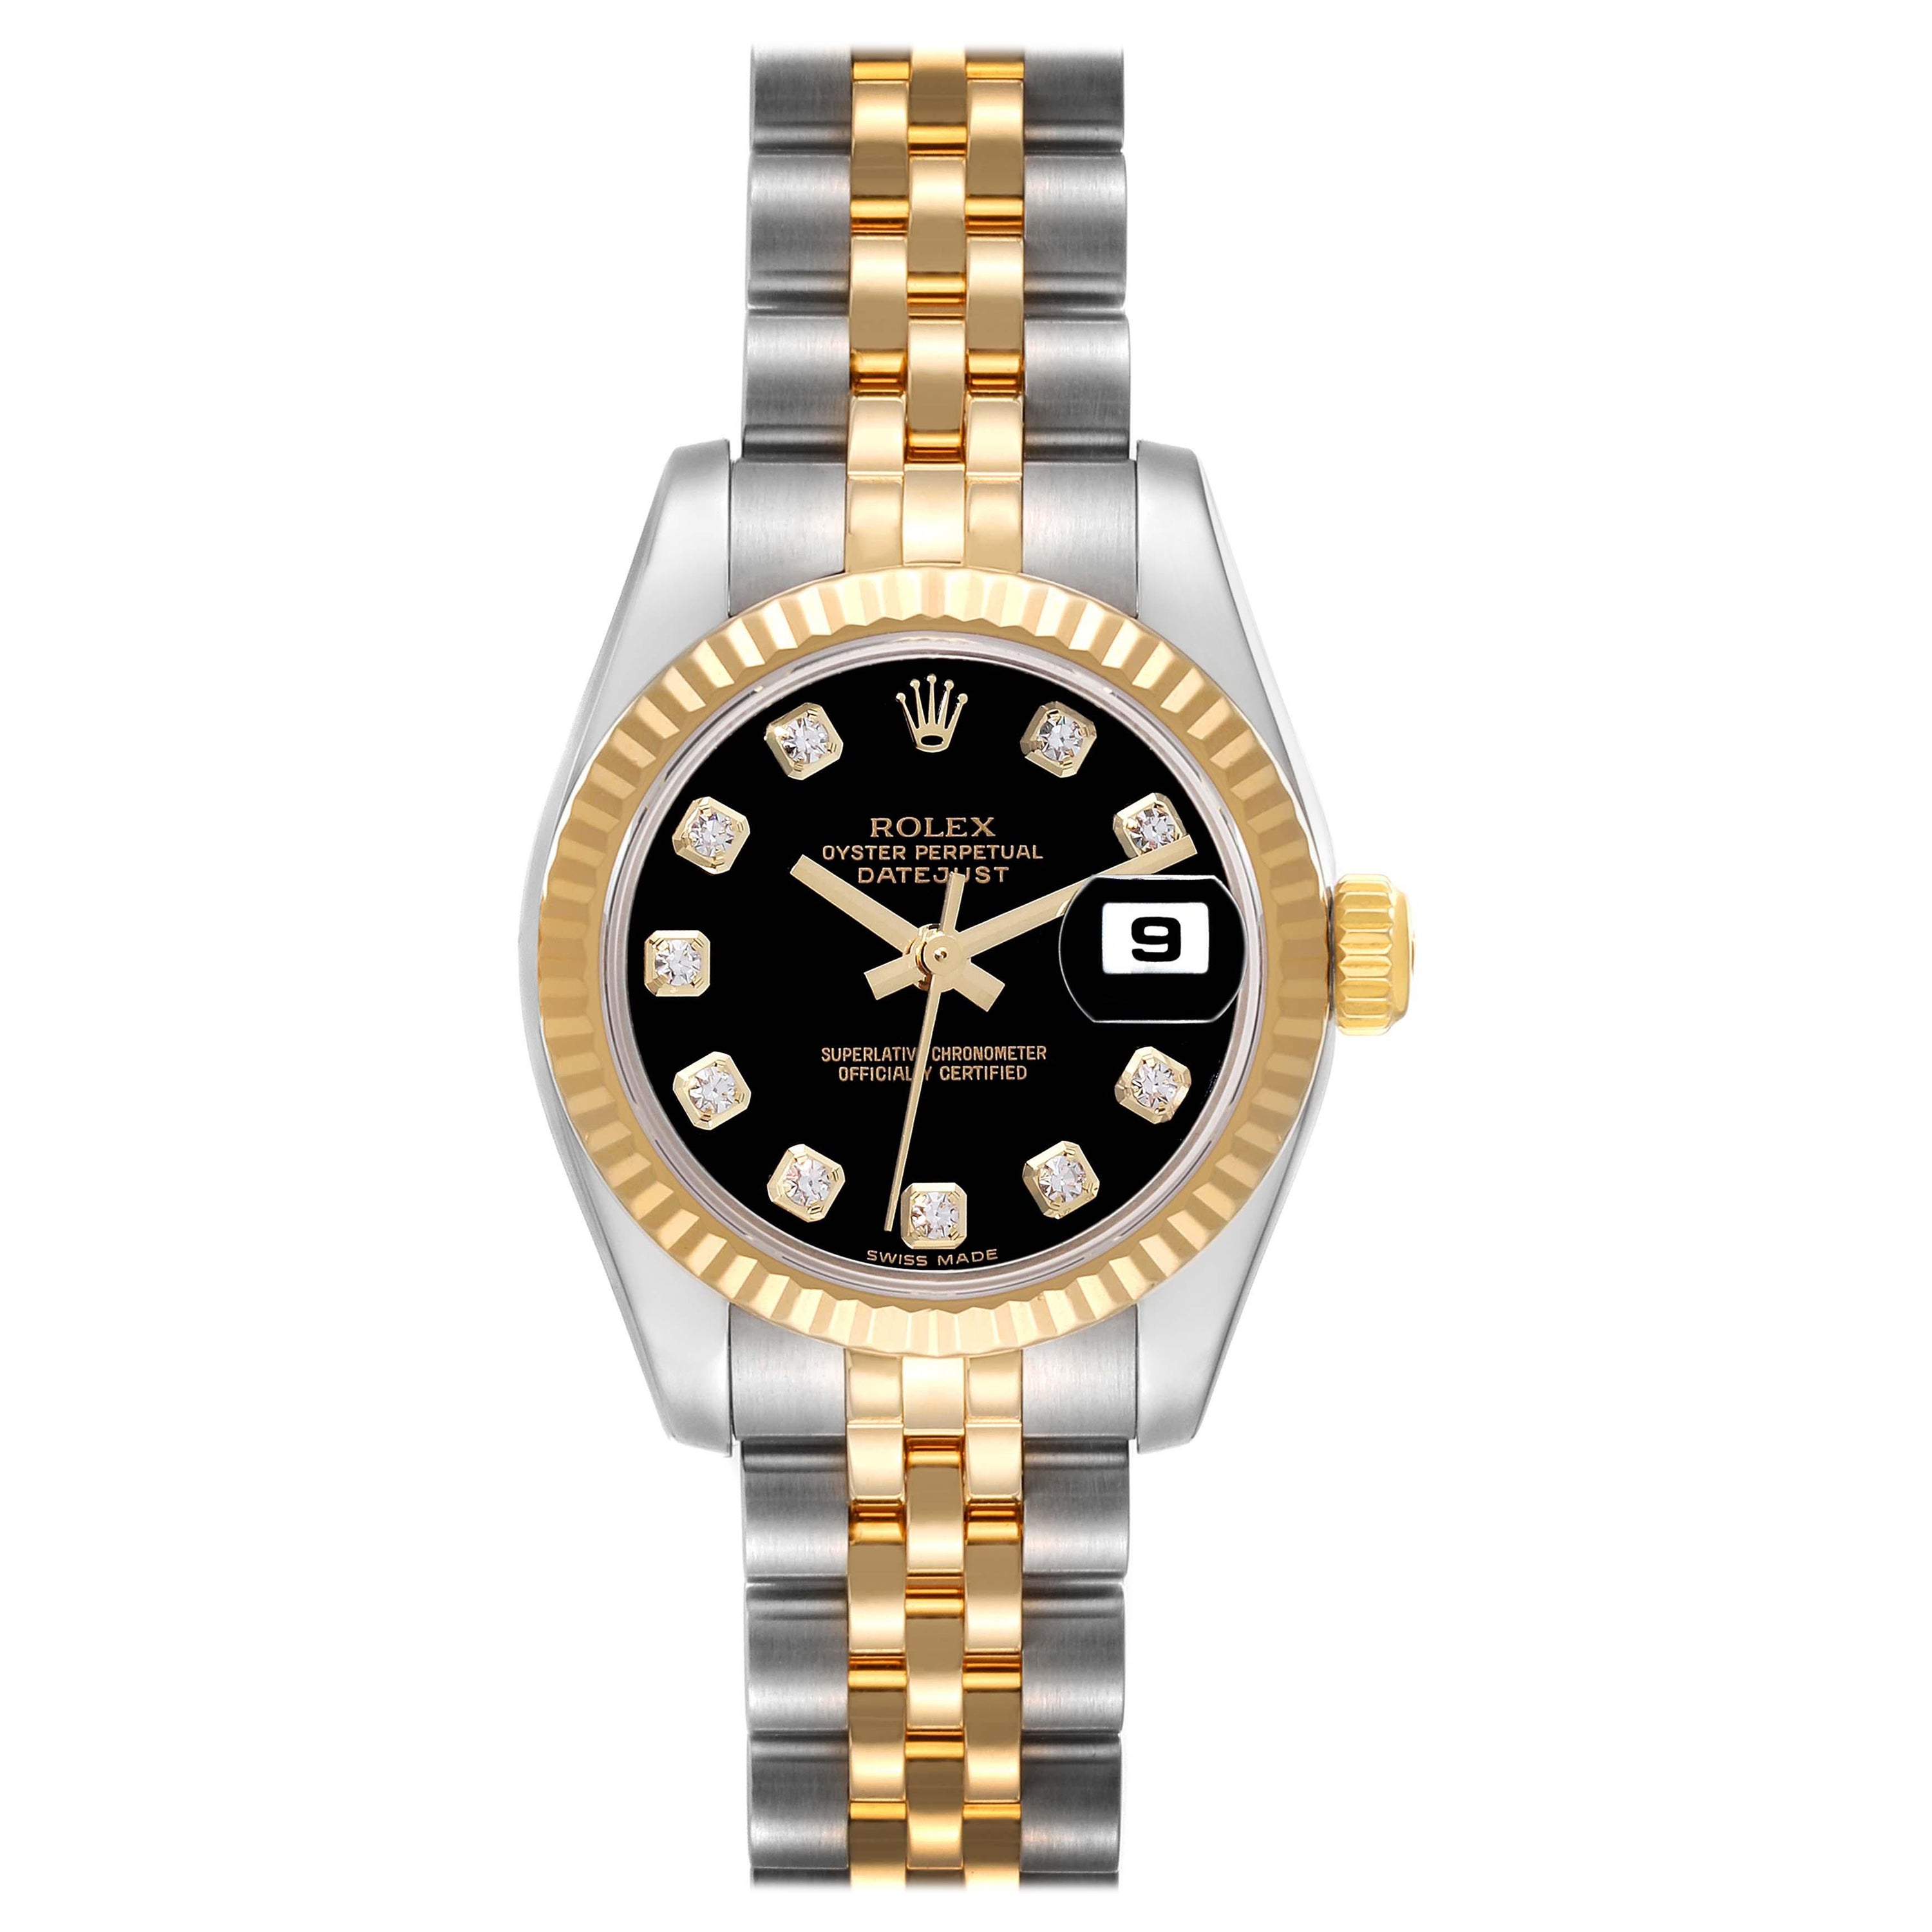 Rolex Datejust Diamond Dial Steel Yellow Gold Ladies Watch 179173 Box Card For Sale